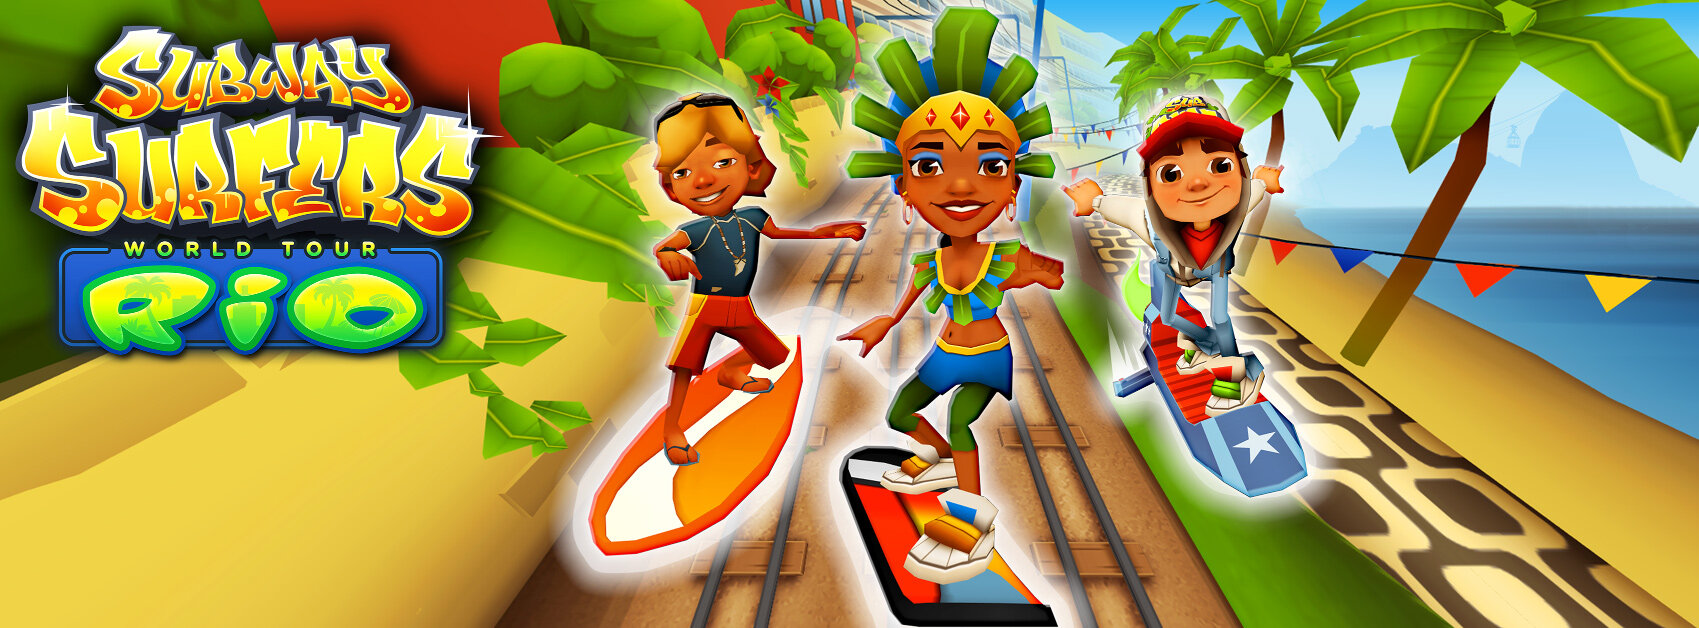 Kiloo Games - Where do you think the Subway Surfers go